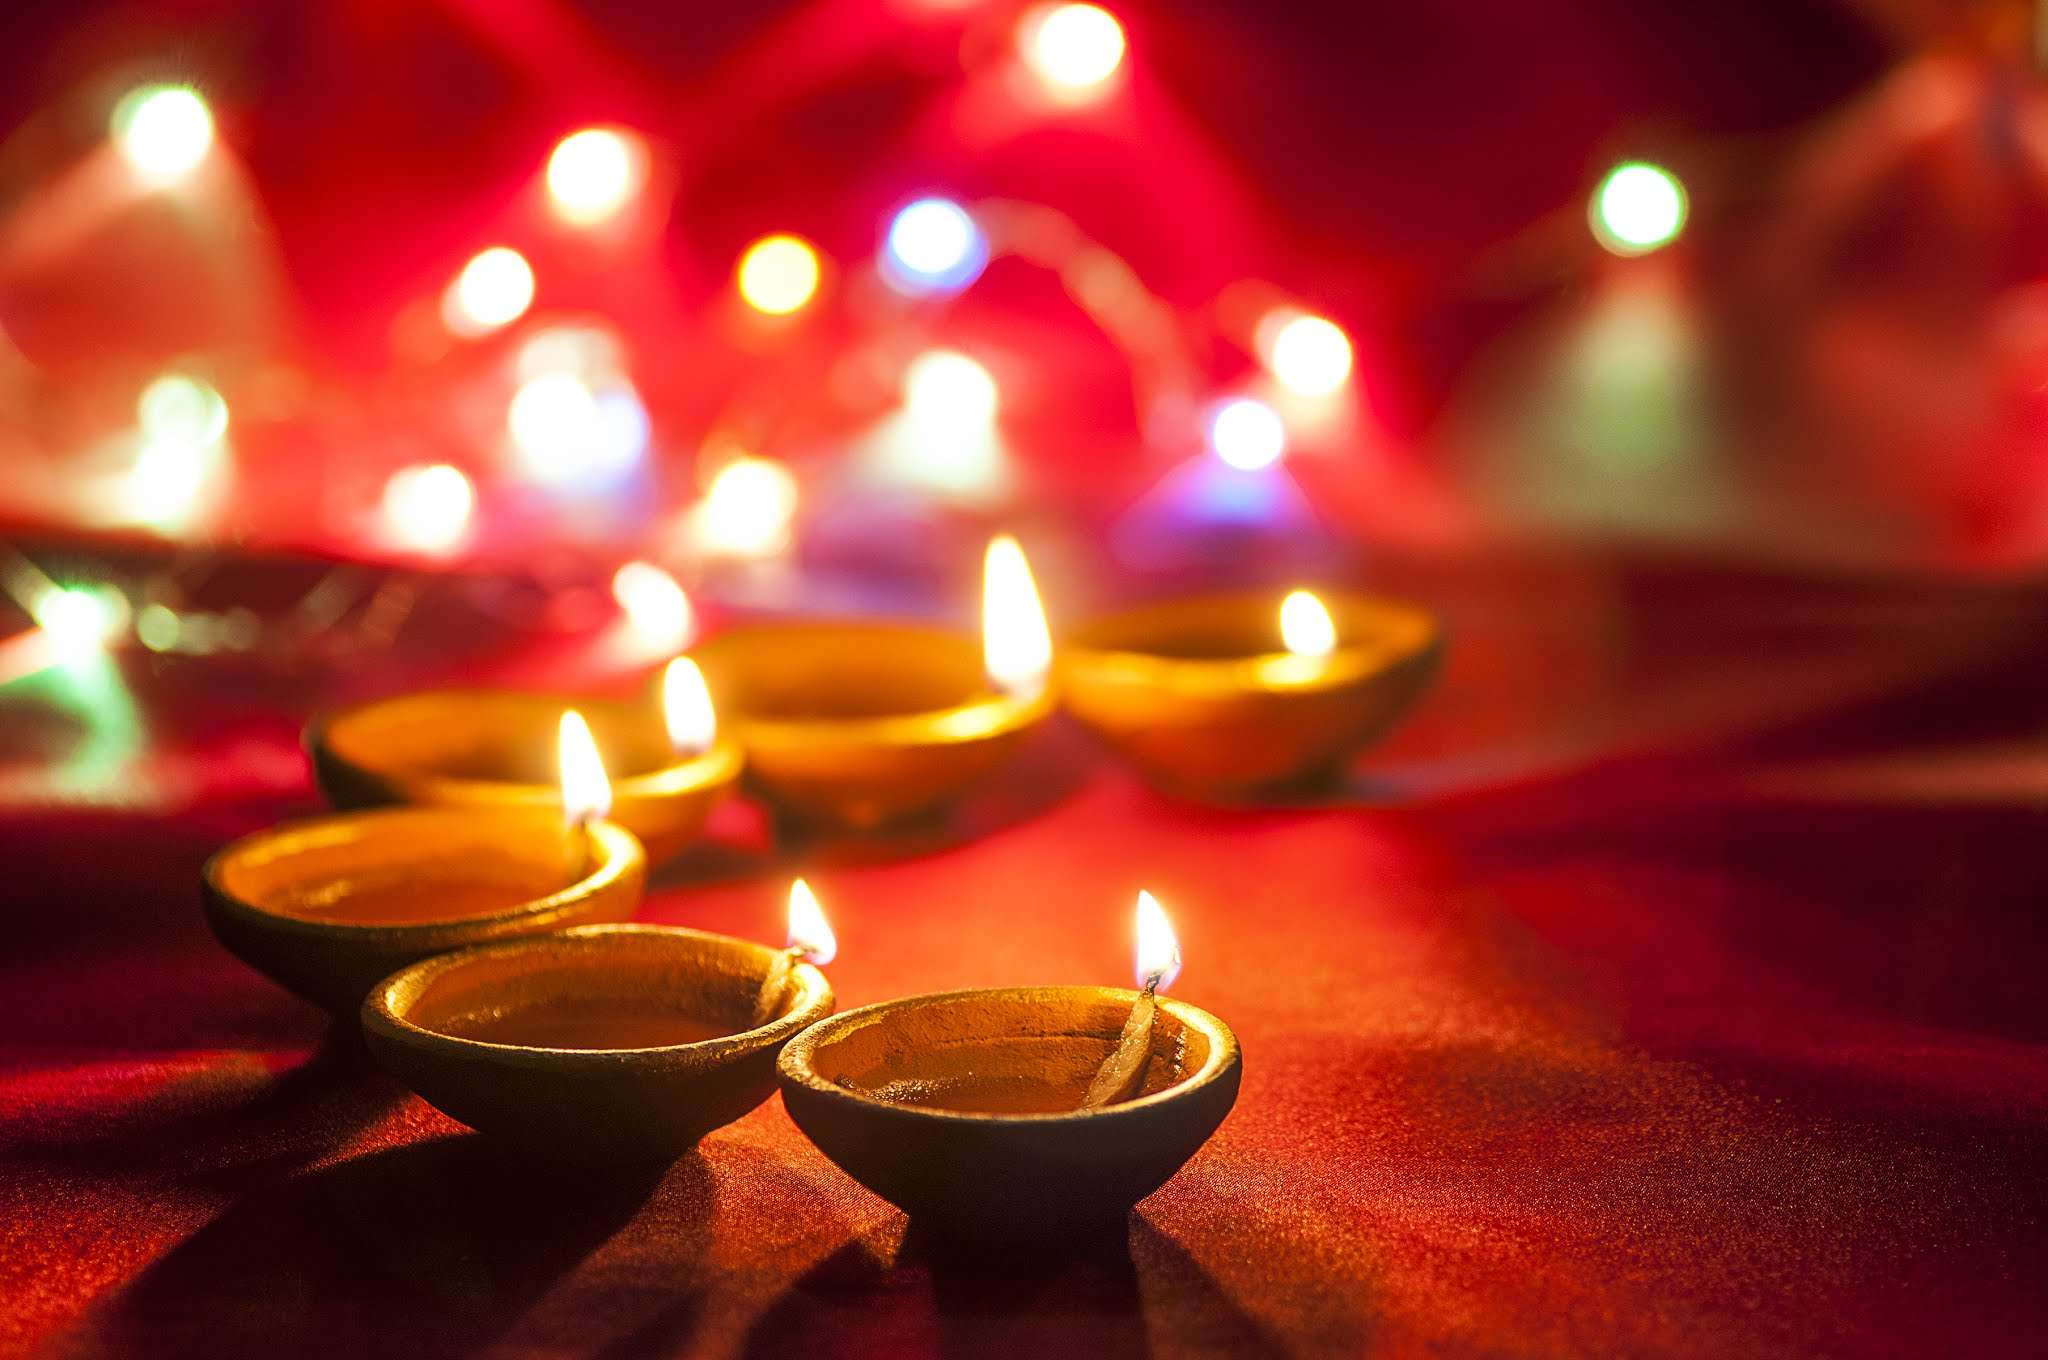 Happy Diwali 2019: WhatsApp messages, wishes, image, Facebook